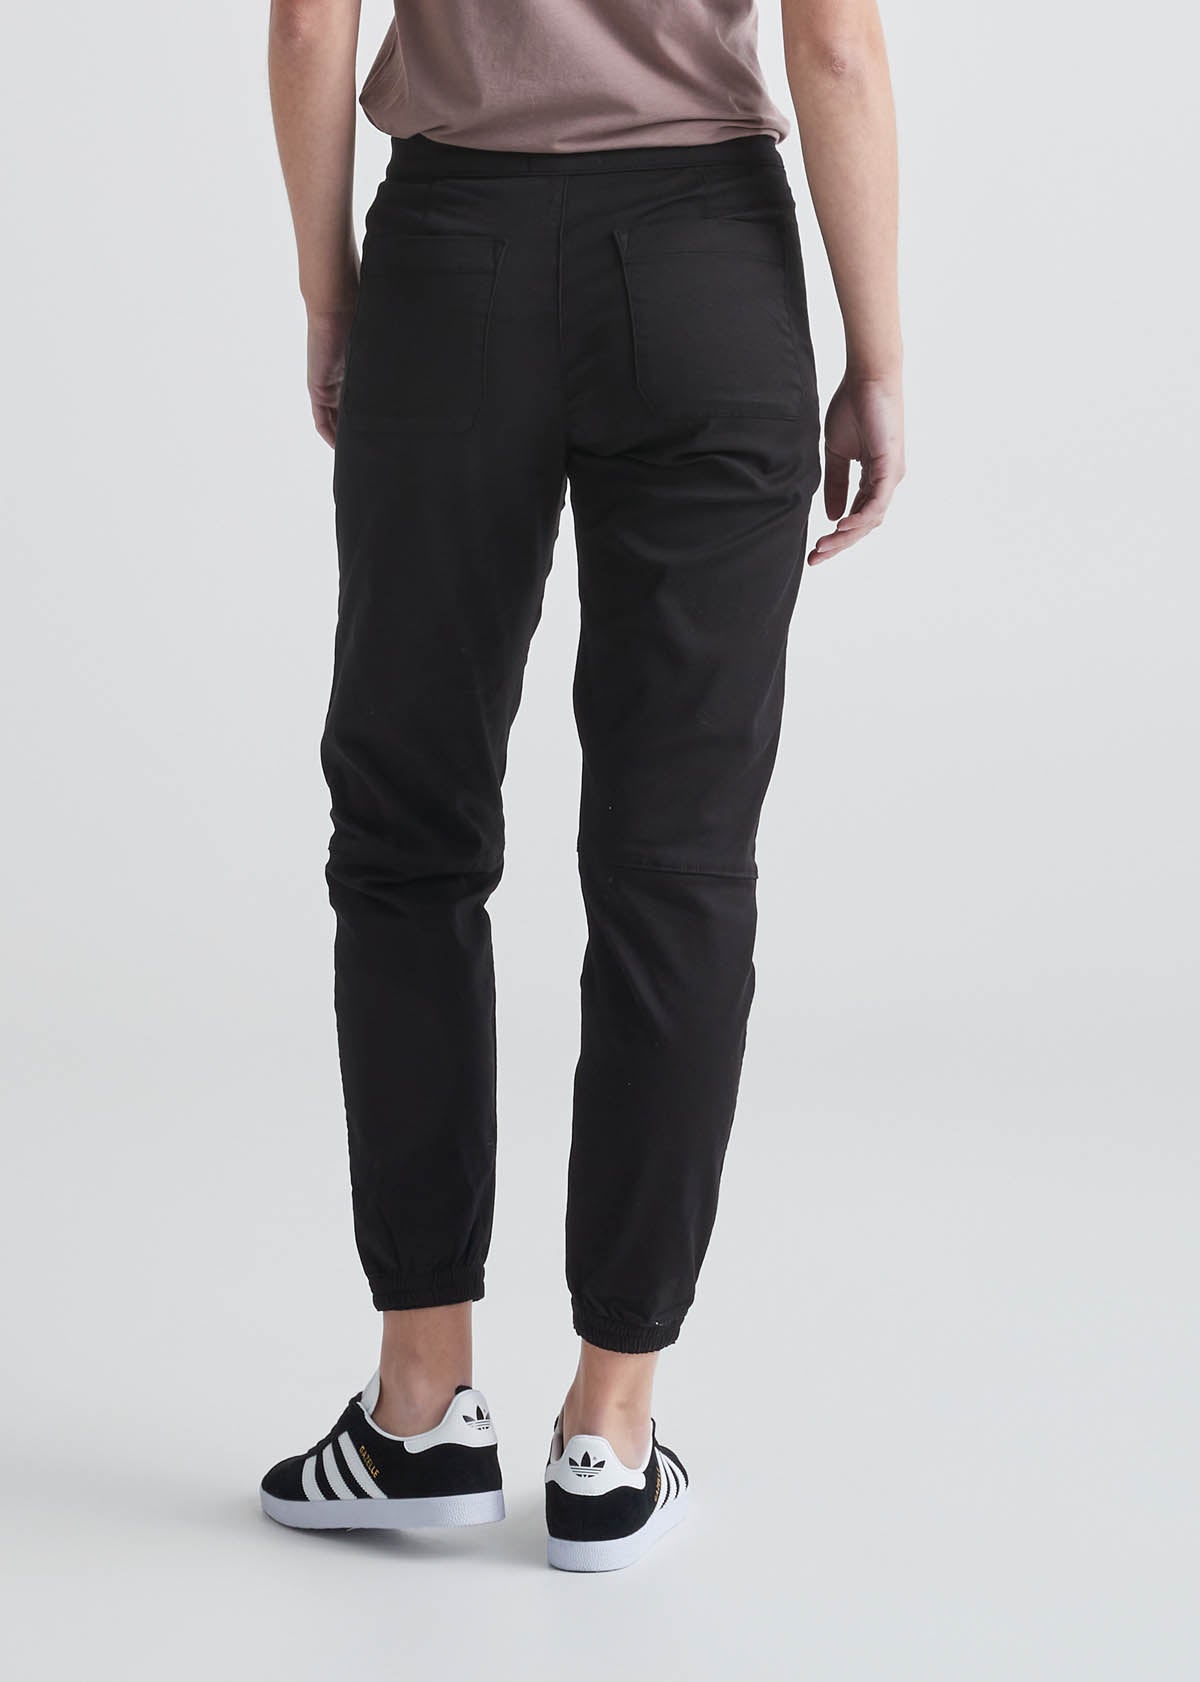 Women's Tapered Jogger Sweatpants High Waisted Athletic -  Canada